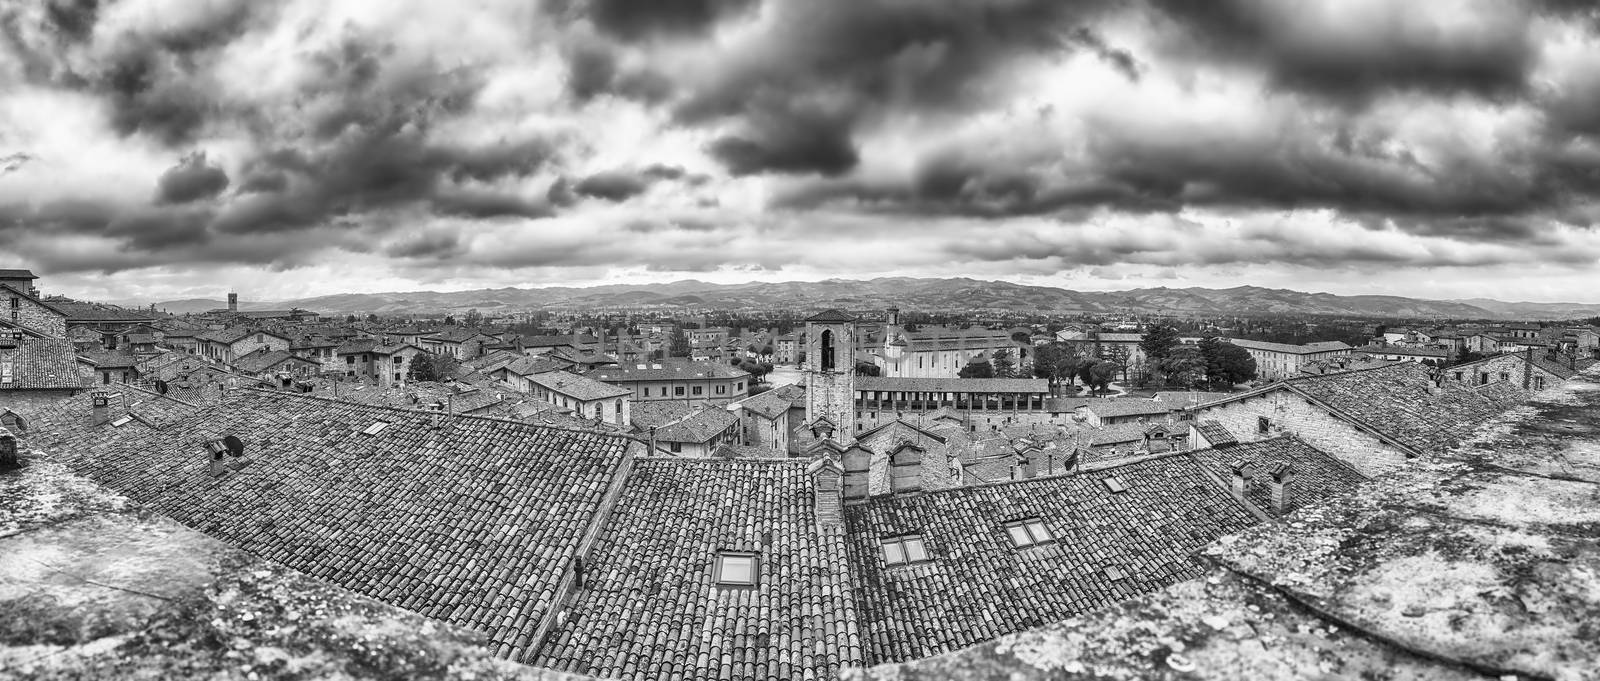 Panoramic view over the roofs of Gubbio, one of the most beautiful medieval towns in central Italy